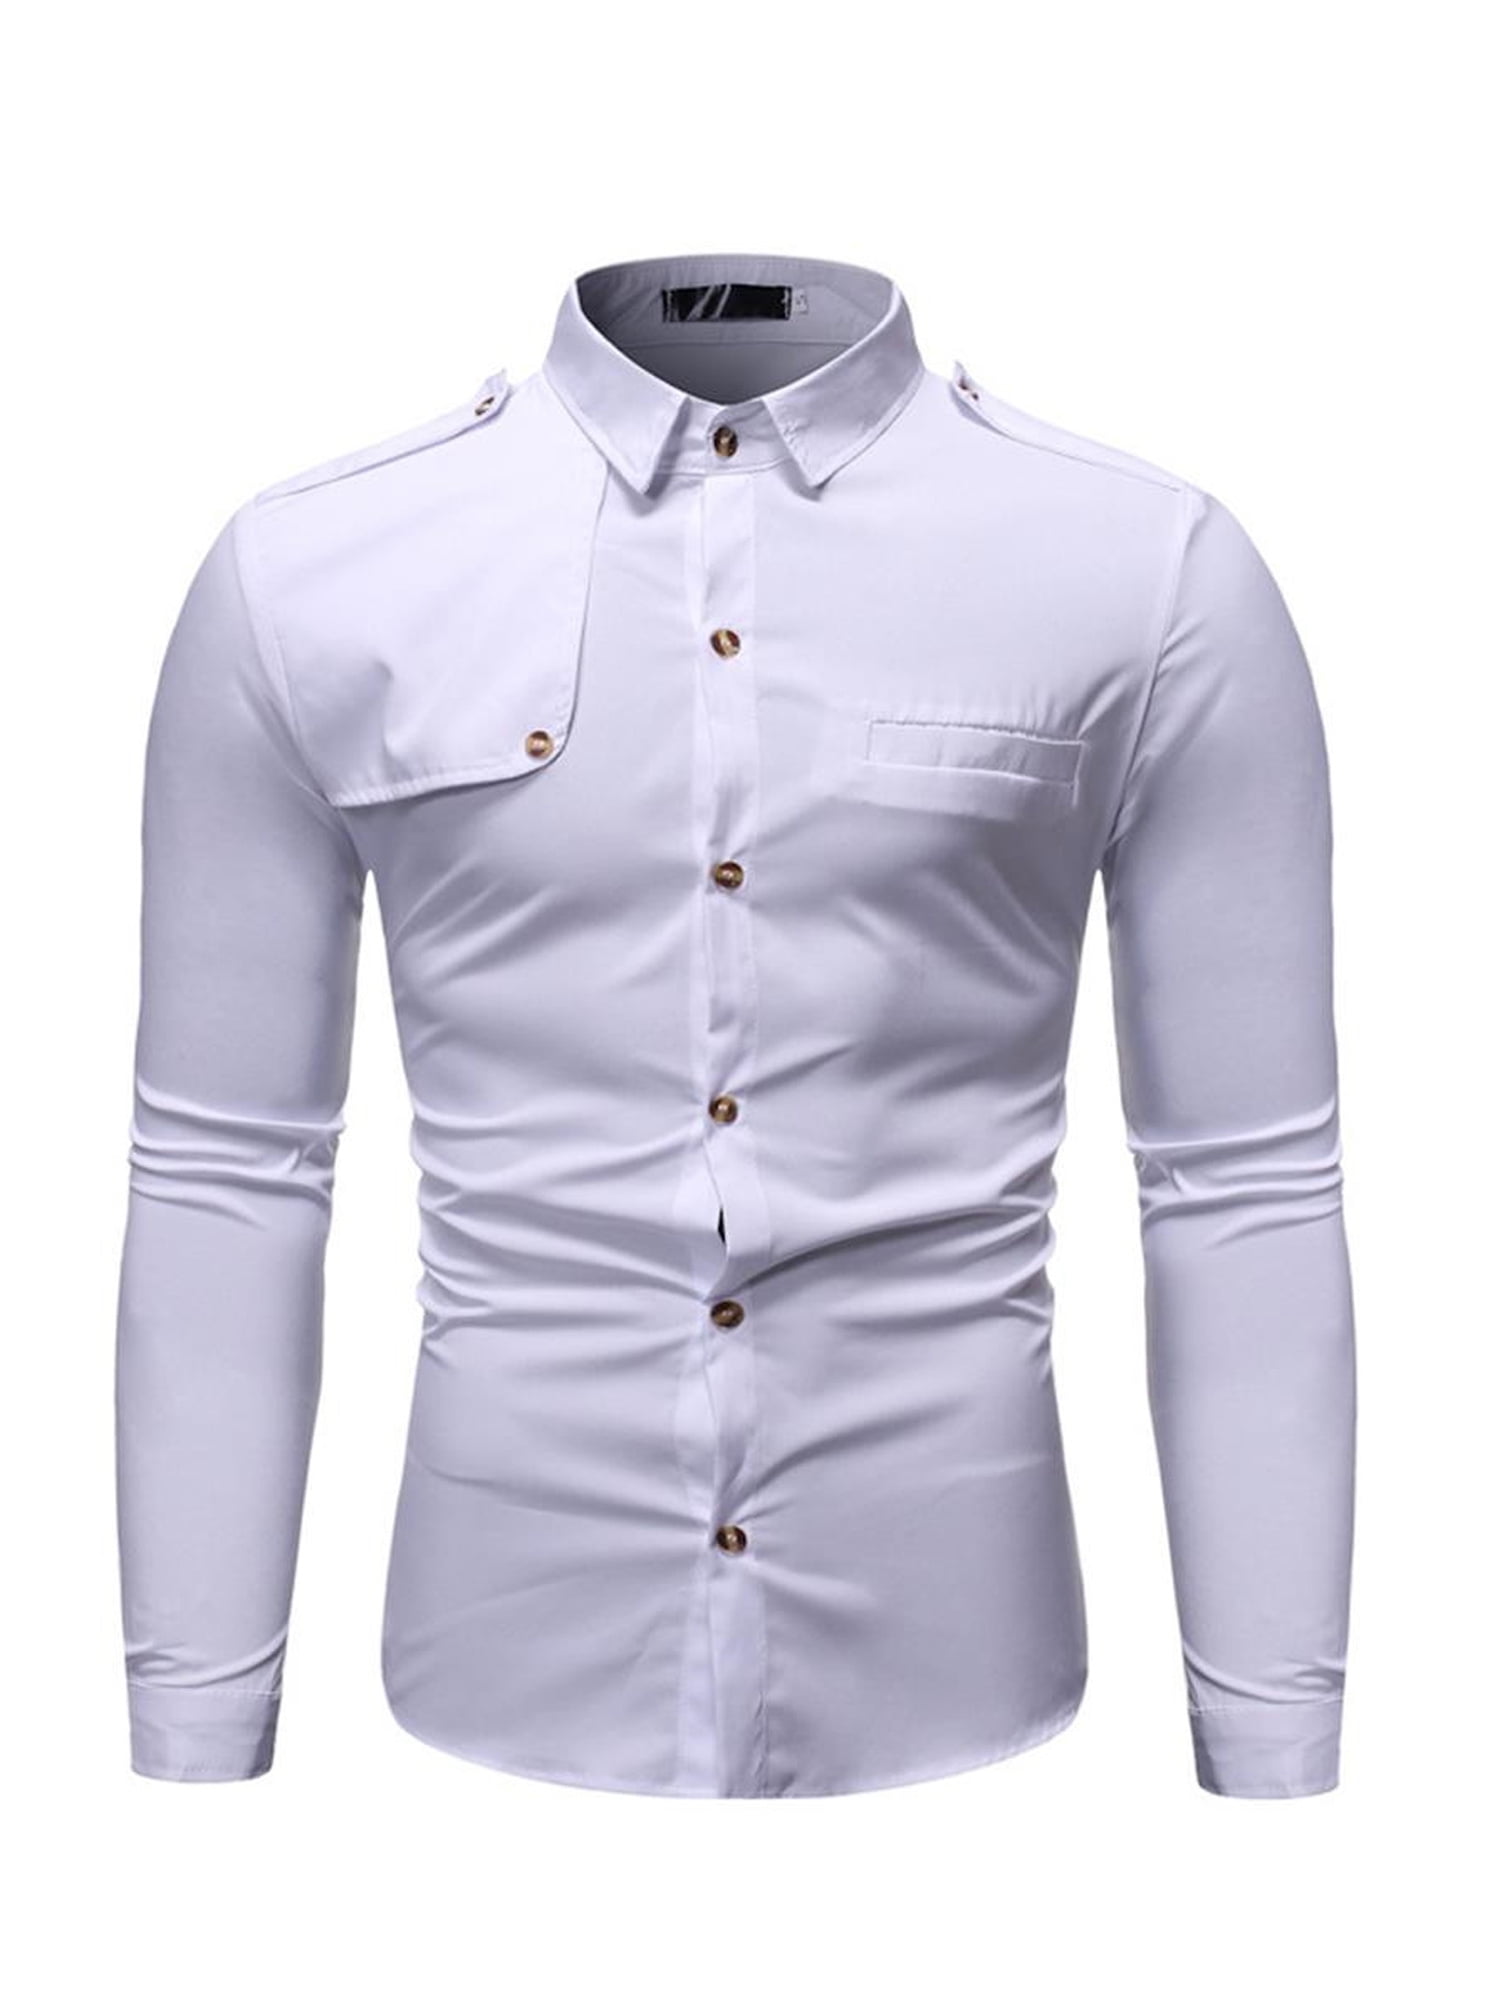 Esast Men Fashional Long-Sleeved Business Slim Fitted Premium Solid Color Lapel Classic Shirt